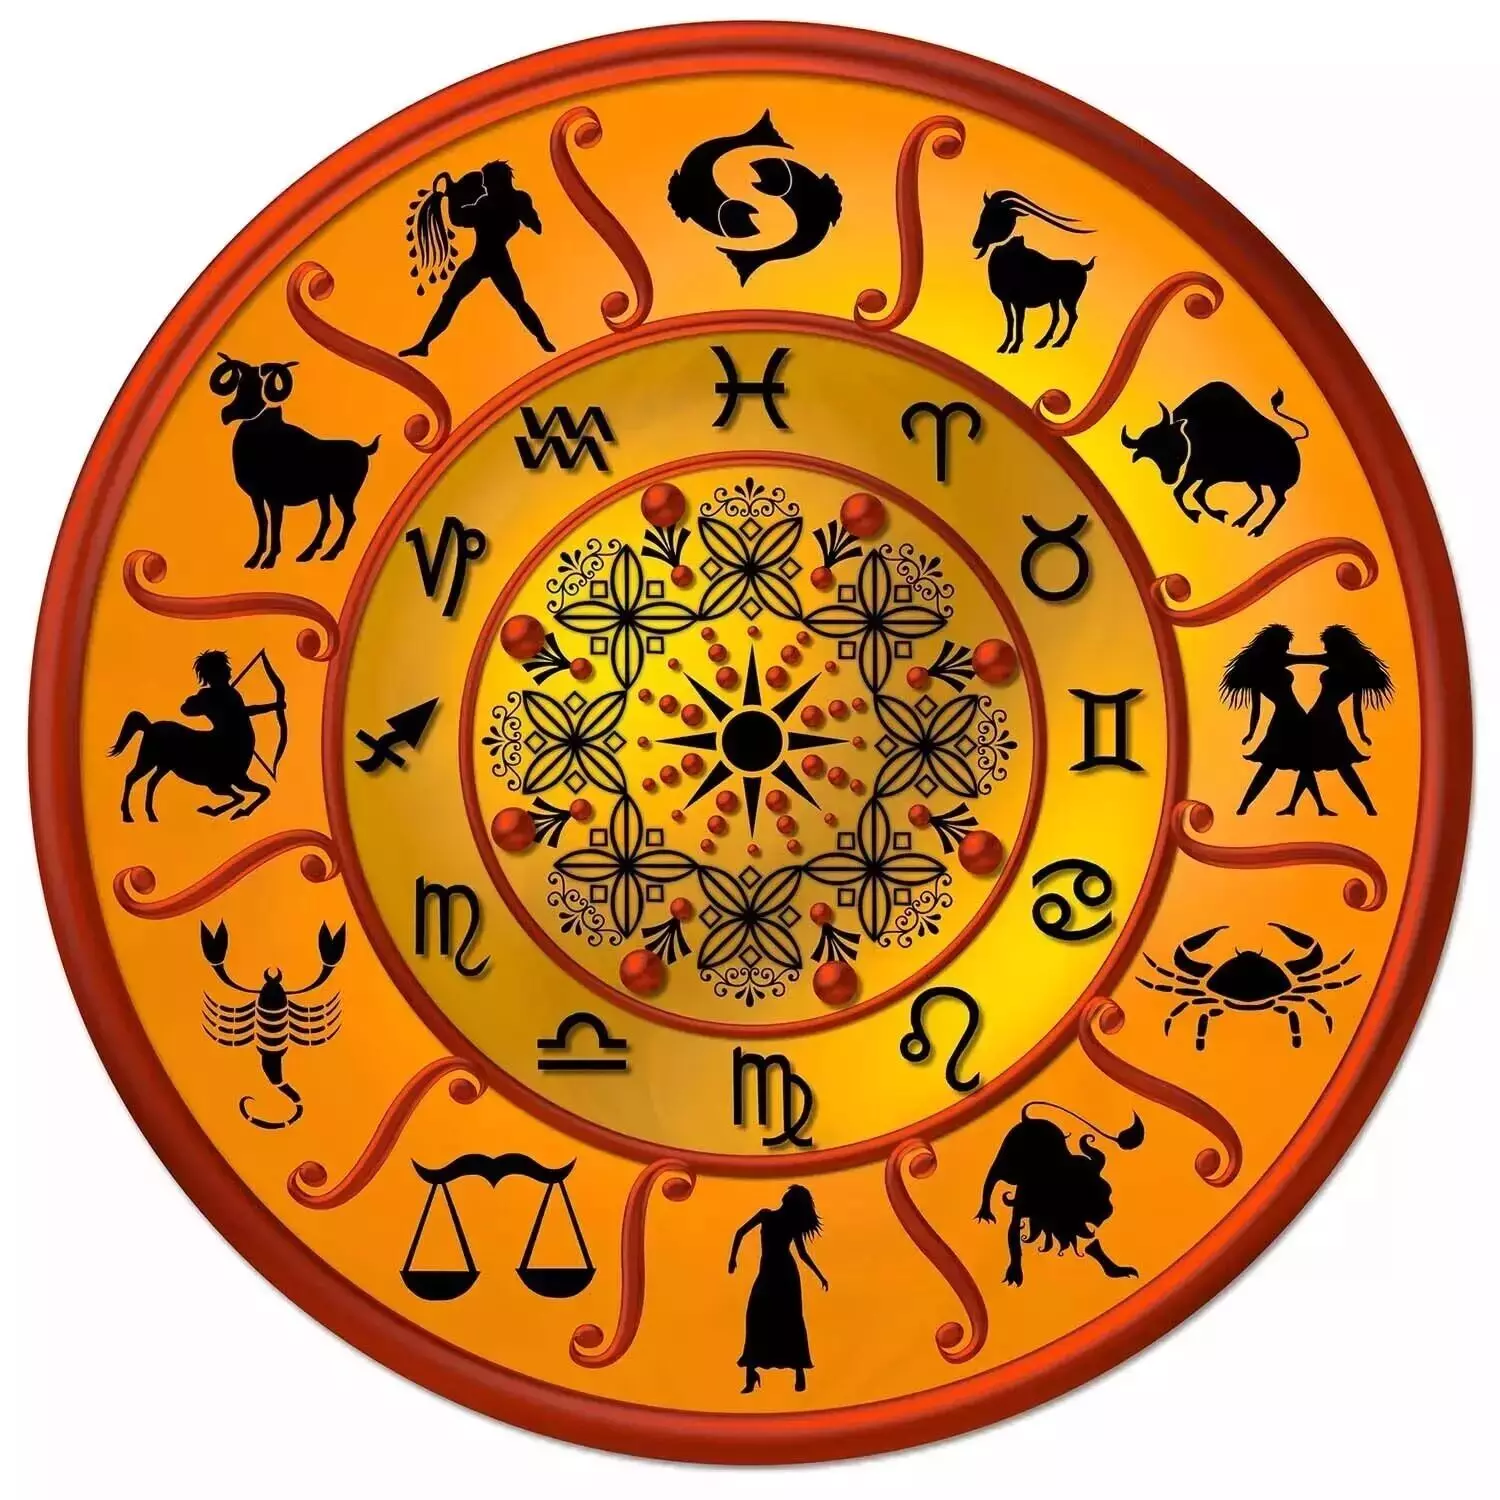 30 June  – Know your todays horoscope